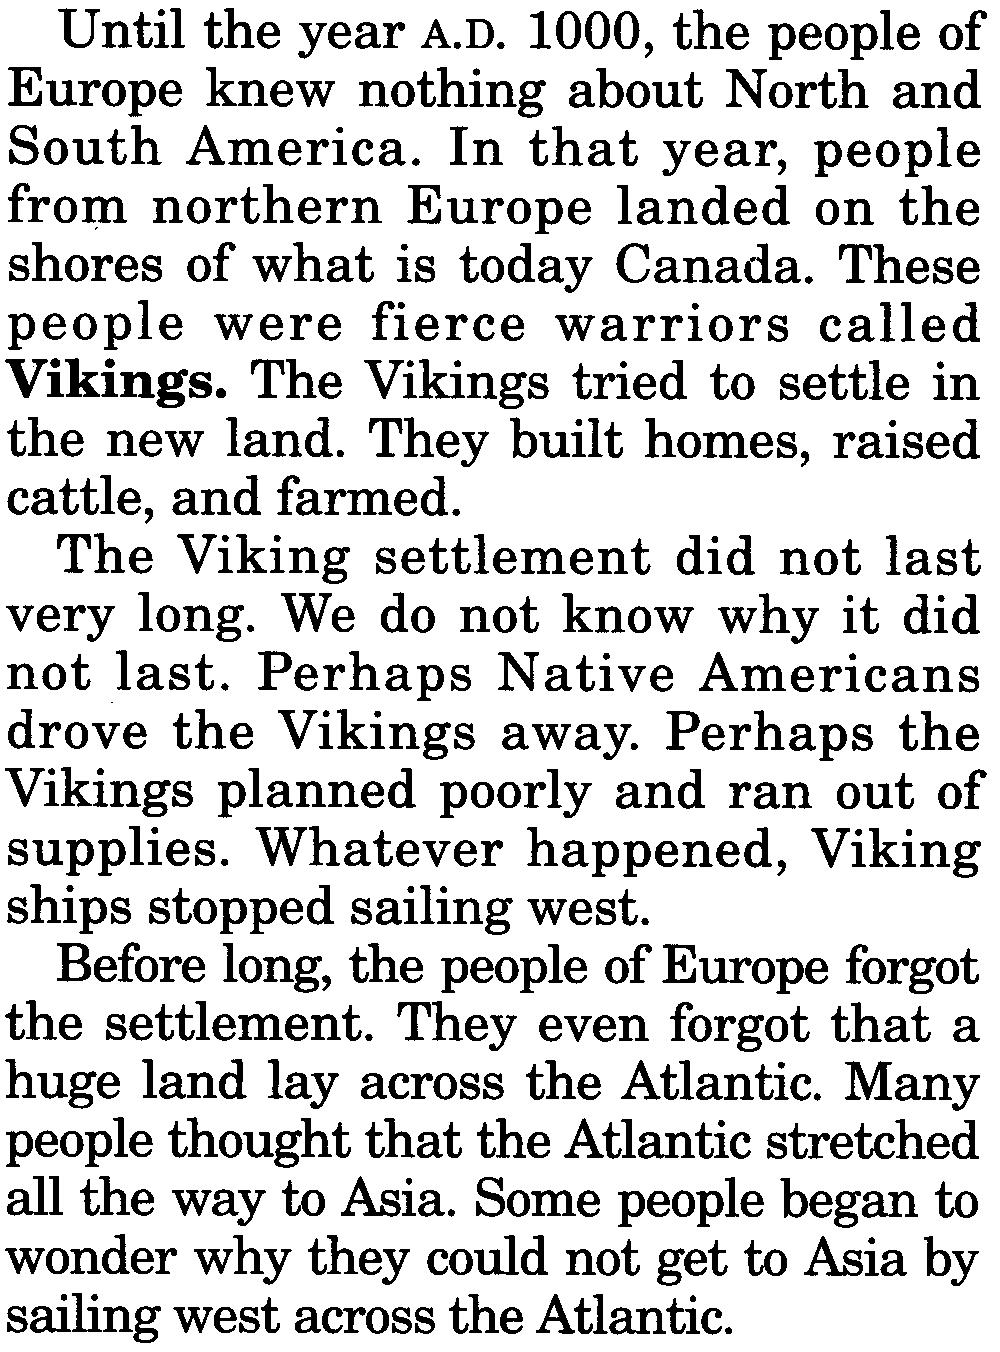 Until the year A.D. 1000, the people of Europe knew nothing about North and South America. In that year, people frol;il northern Europe landed on the shores of what is today Canada.